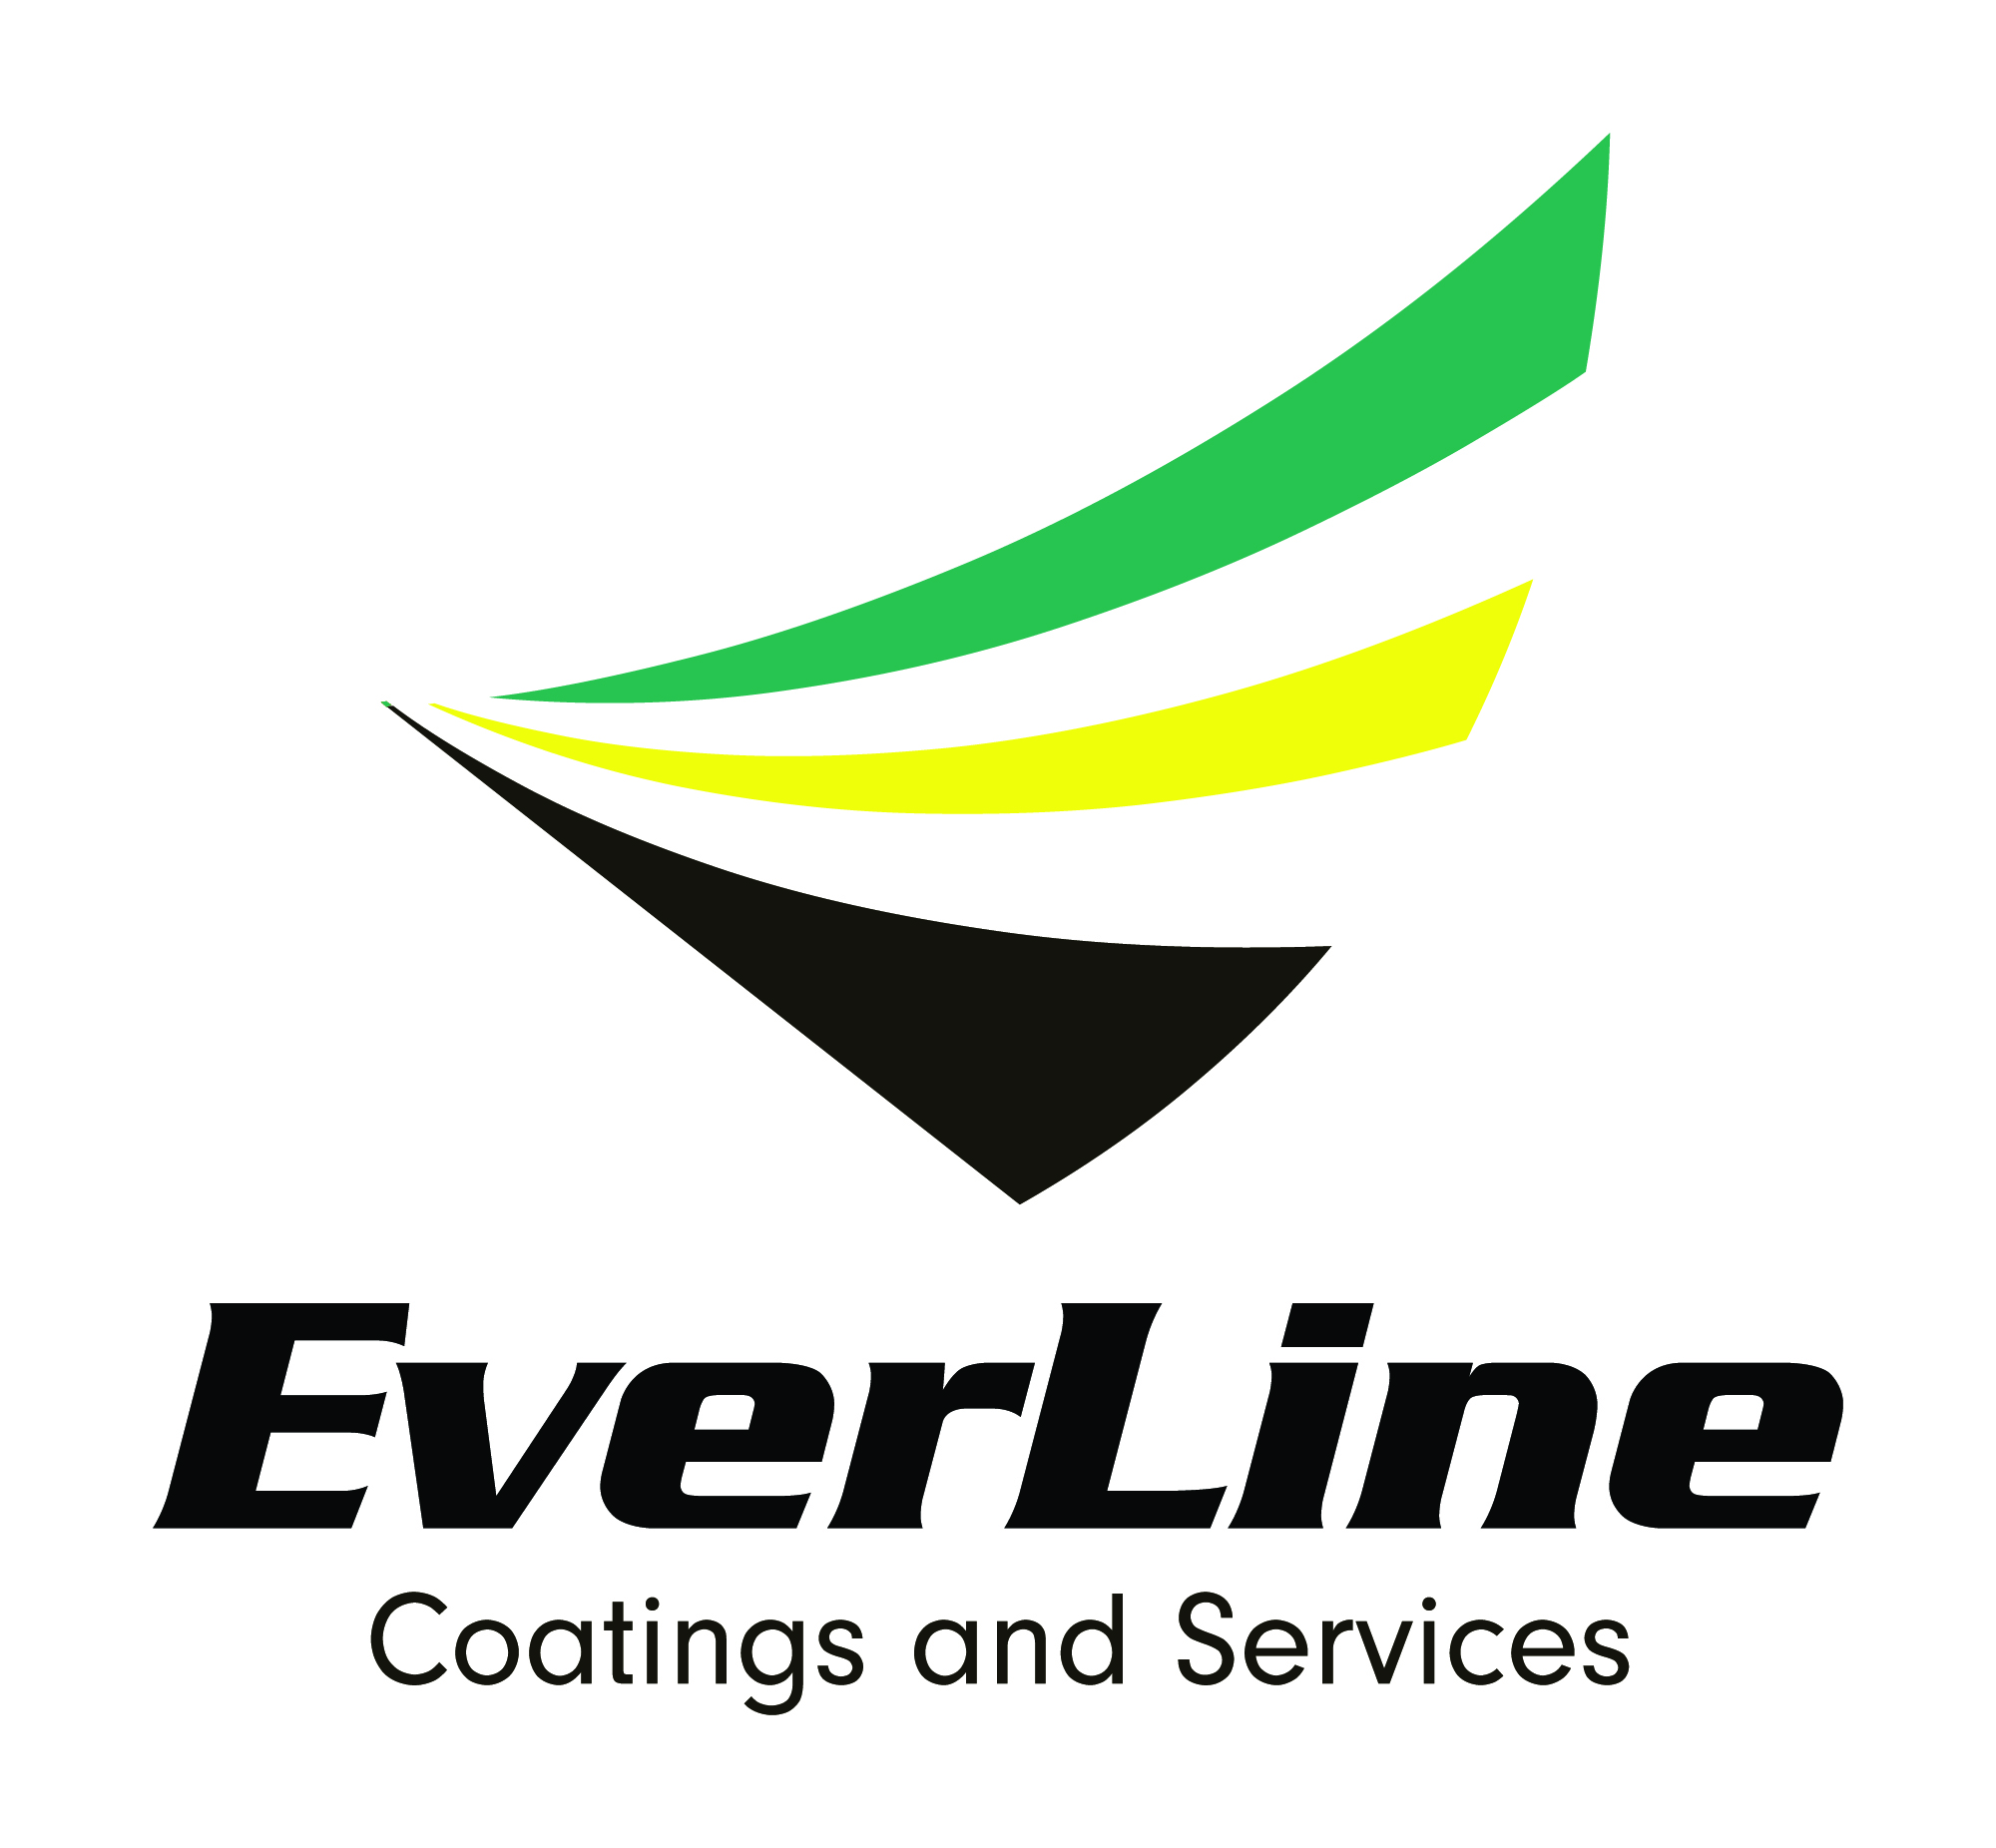 EverLine Coatings and Services - East Phoenix & Scottsdale Logo